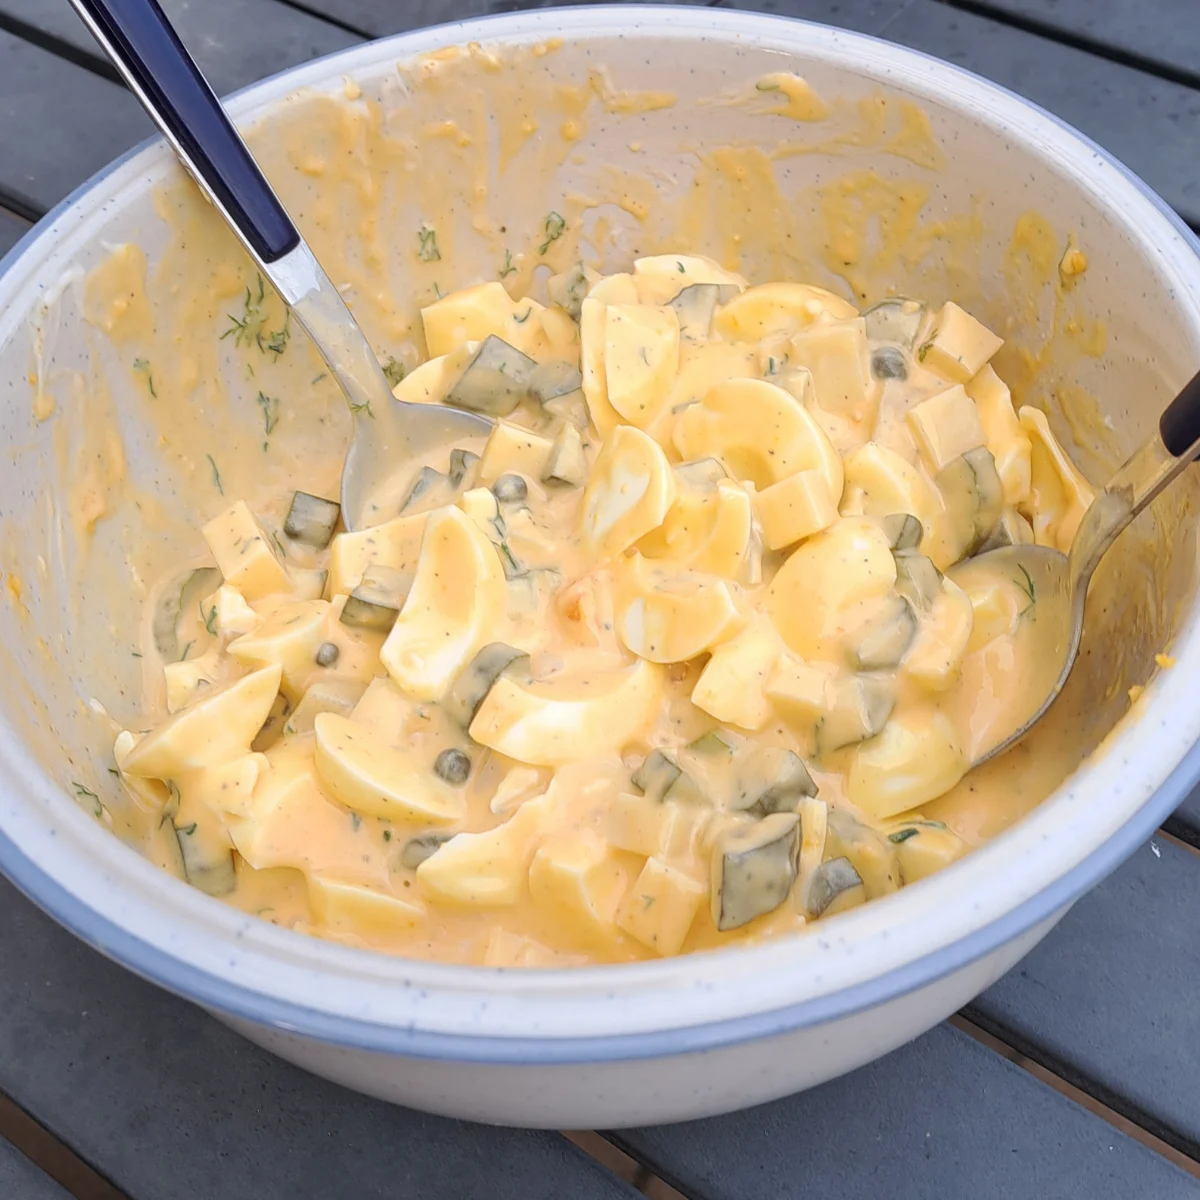 Freshly made egg salad in a bowl, featuring hard-boiled eggs, capers, pickles, cheese, mustard, mayo, miracle whip, and dill.